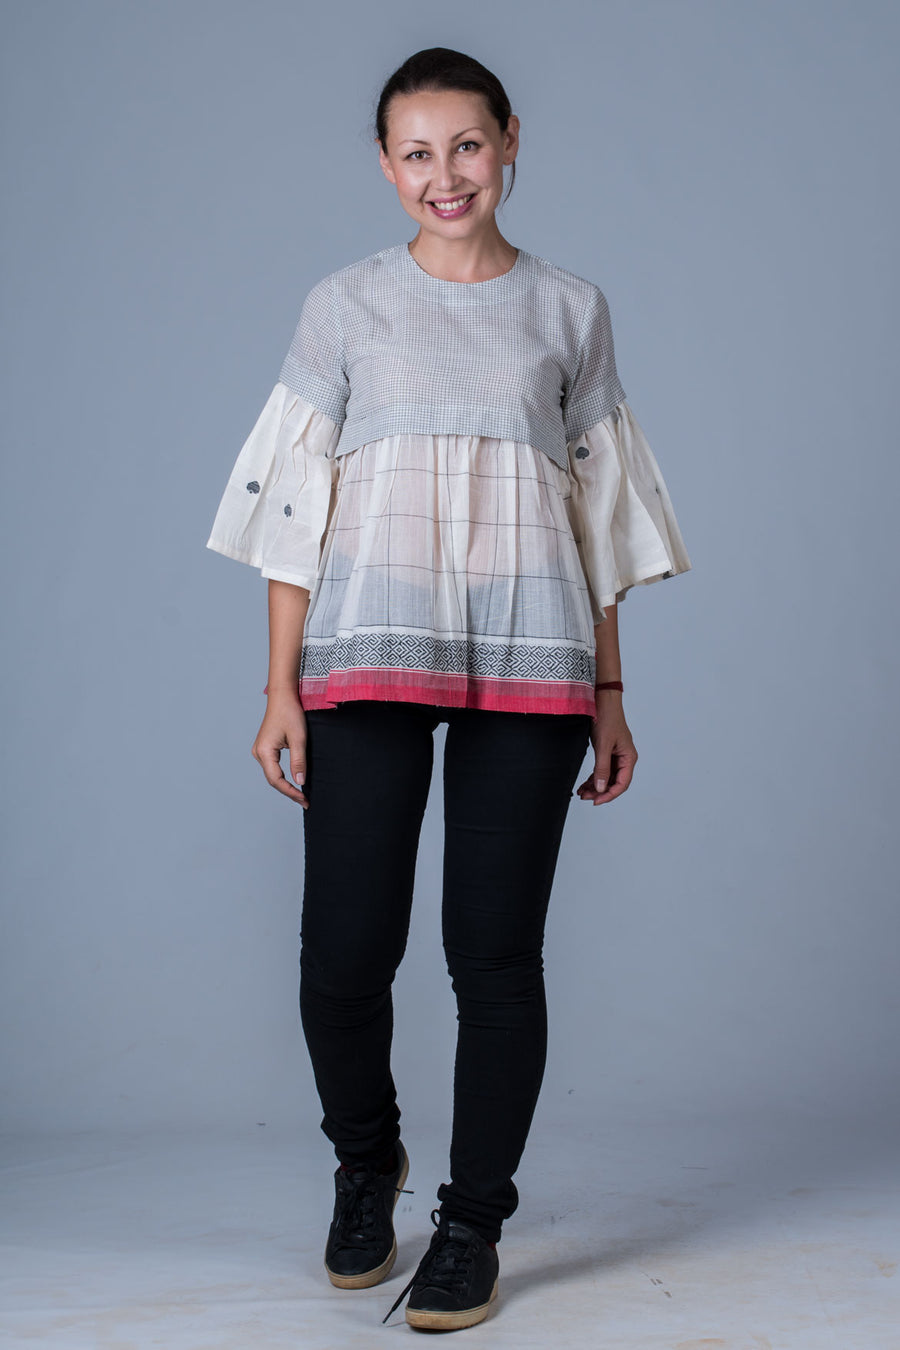 Shalini TOP -Composed top of organic cotton and handwoven Khadi